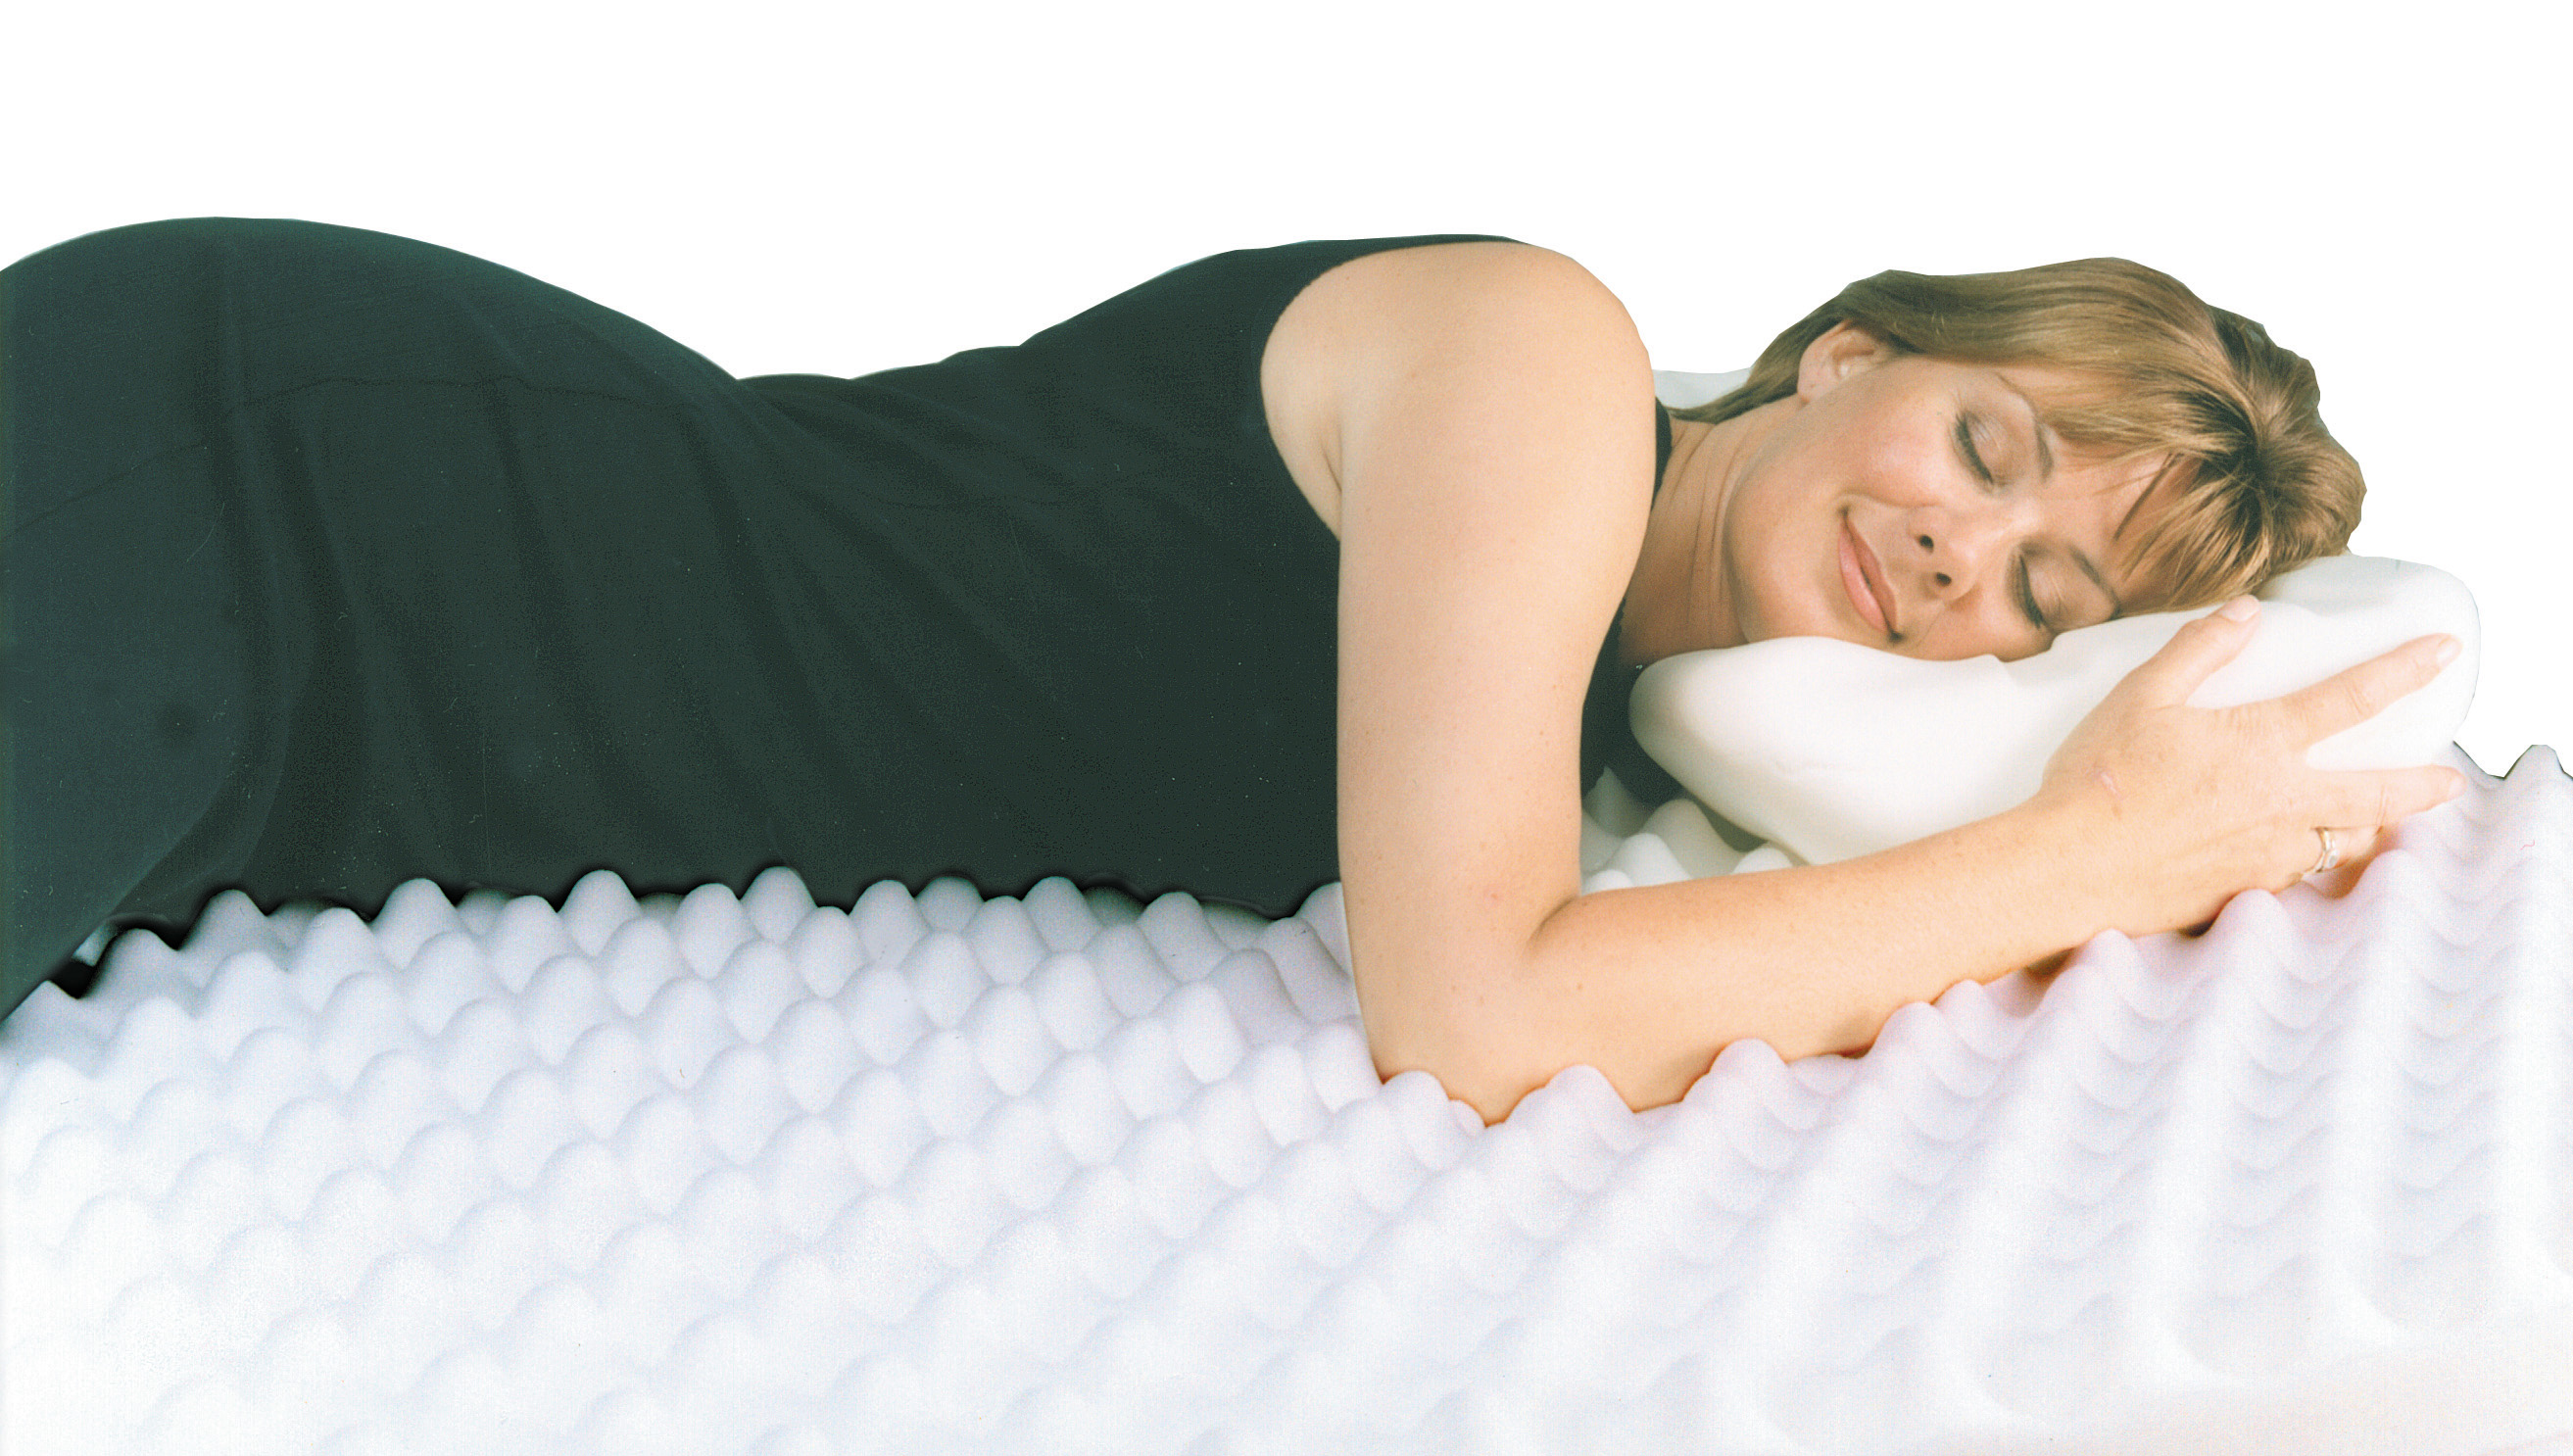  Tips to choose a mattress, how to choose a mattress, mattress choosing, choosing the best mattress.